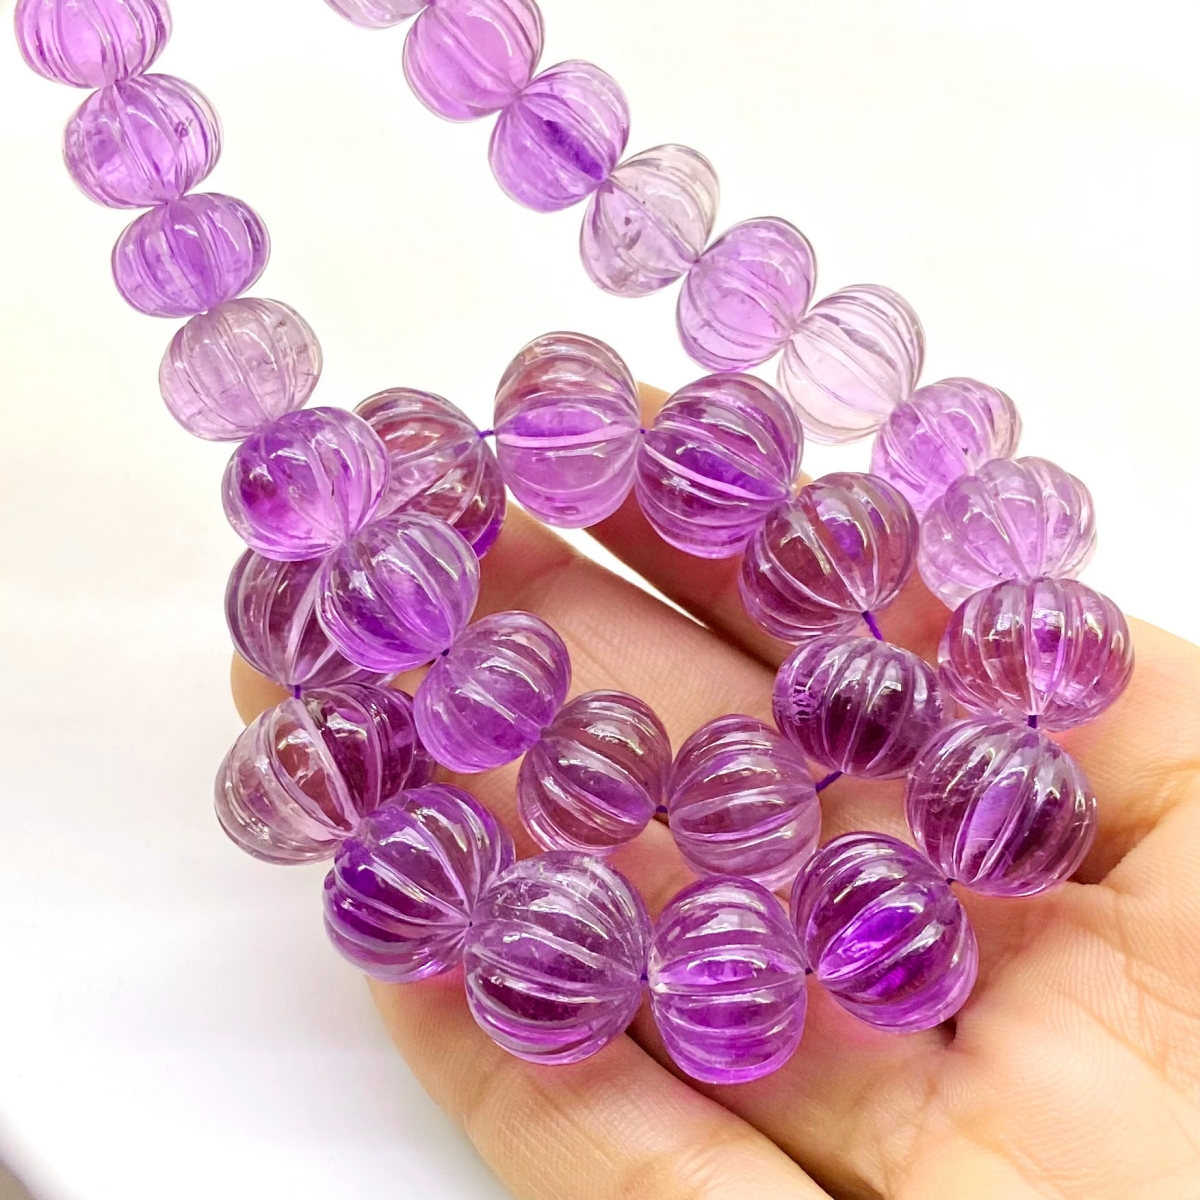 Stone Adorable! 2 Amethyst Sitting Carved Cat Beads | 21x14x10mm | Purple | 2 Beads